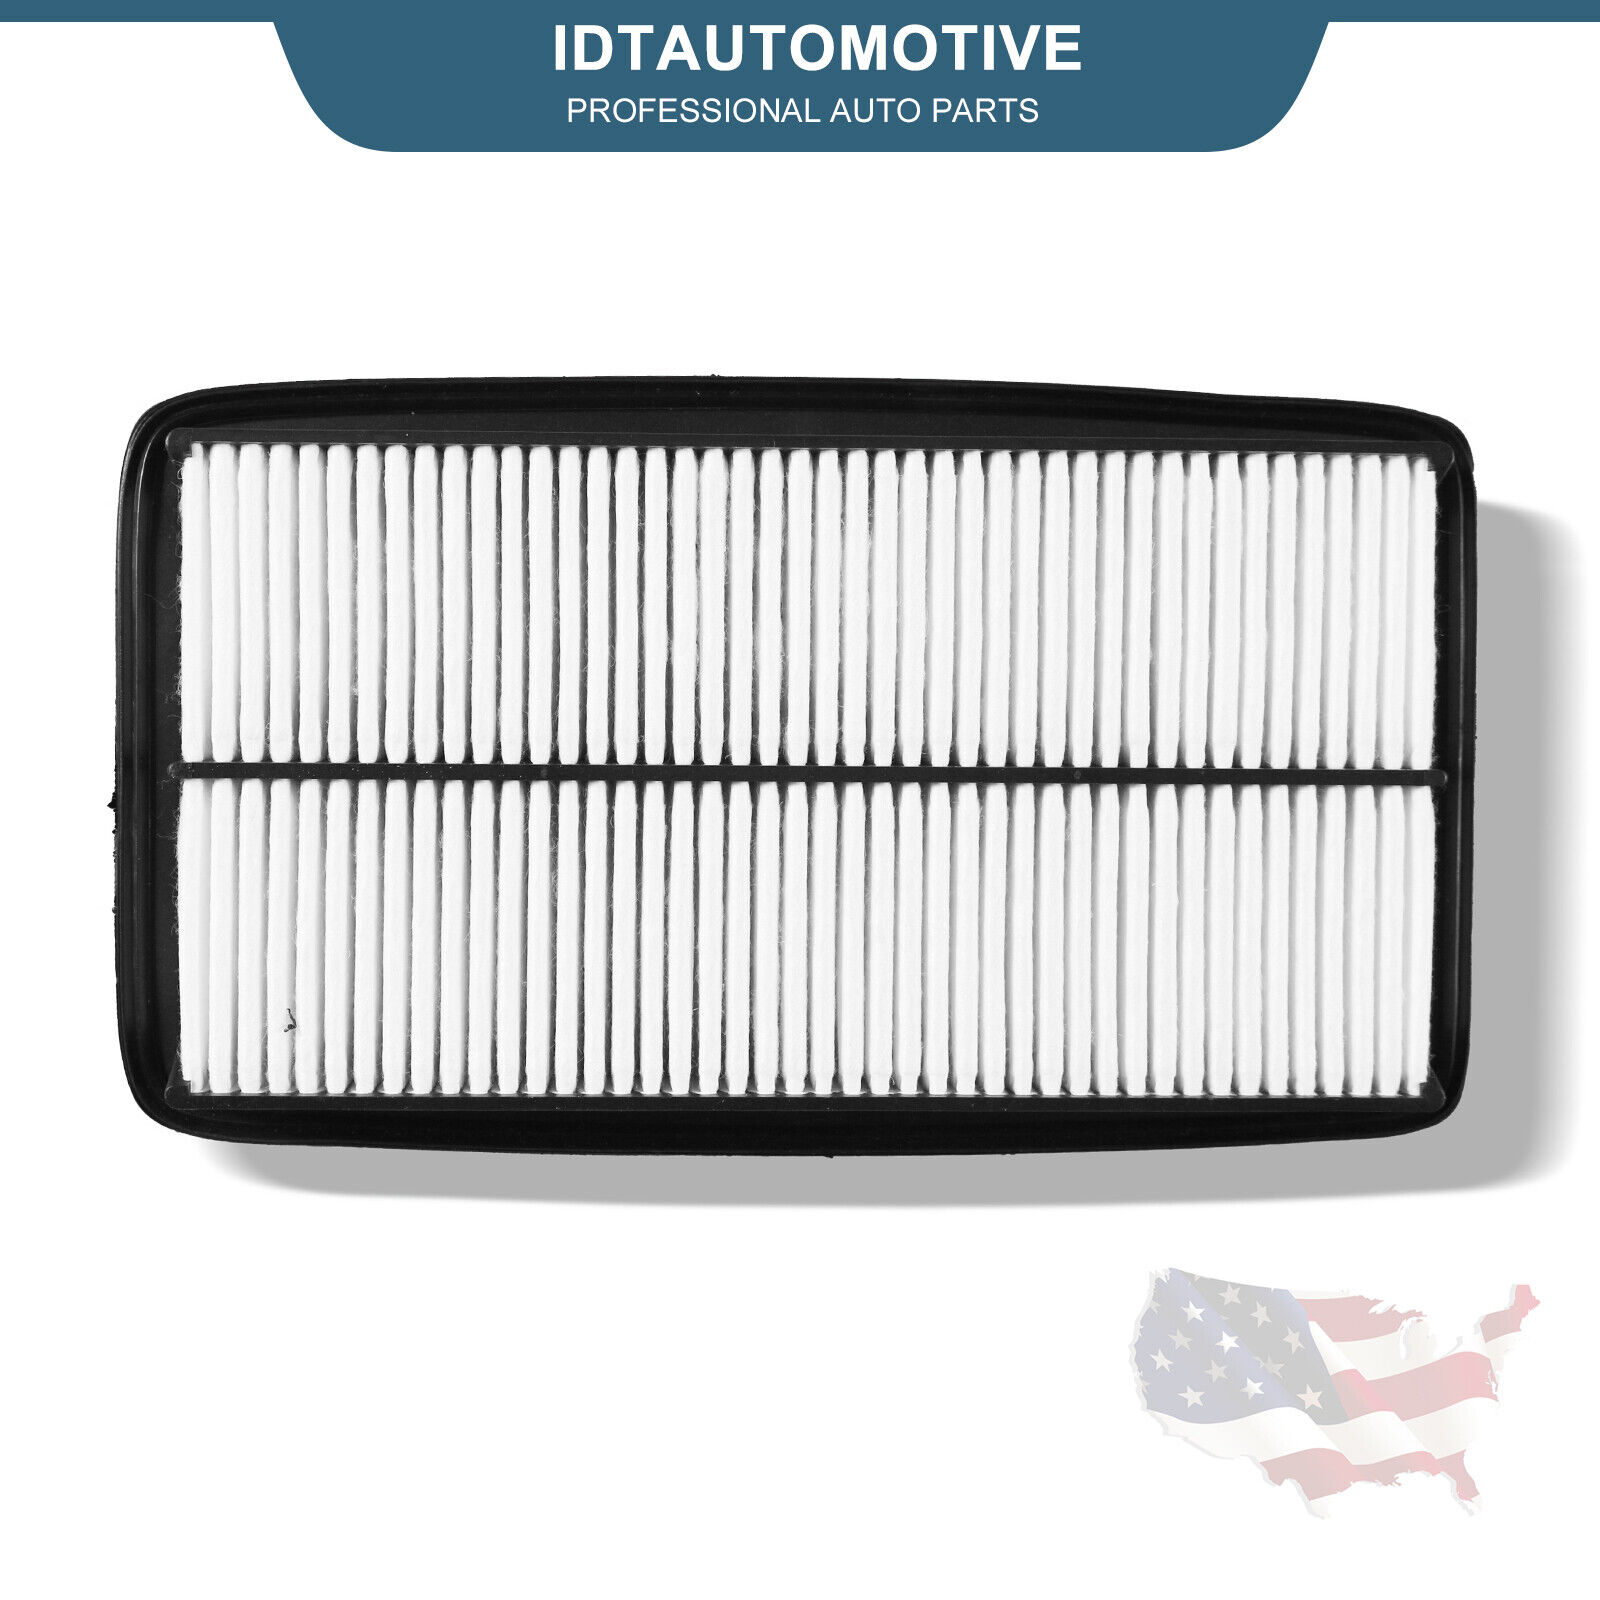 Engine Air Filter for 2010-2013 2014 2015 Acura ZDX & MDX Pilot #17220-RYE-A10